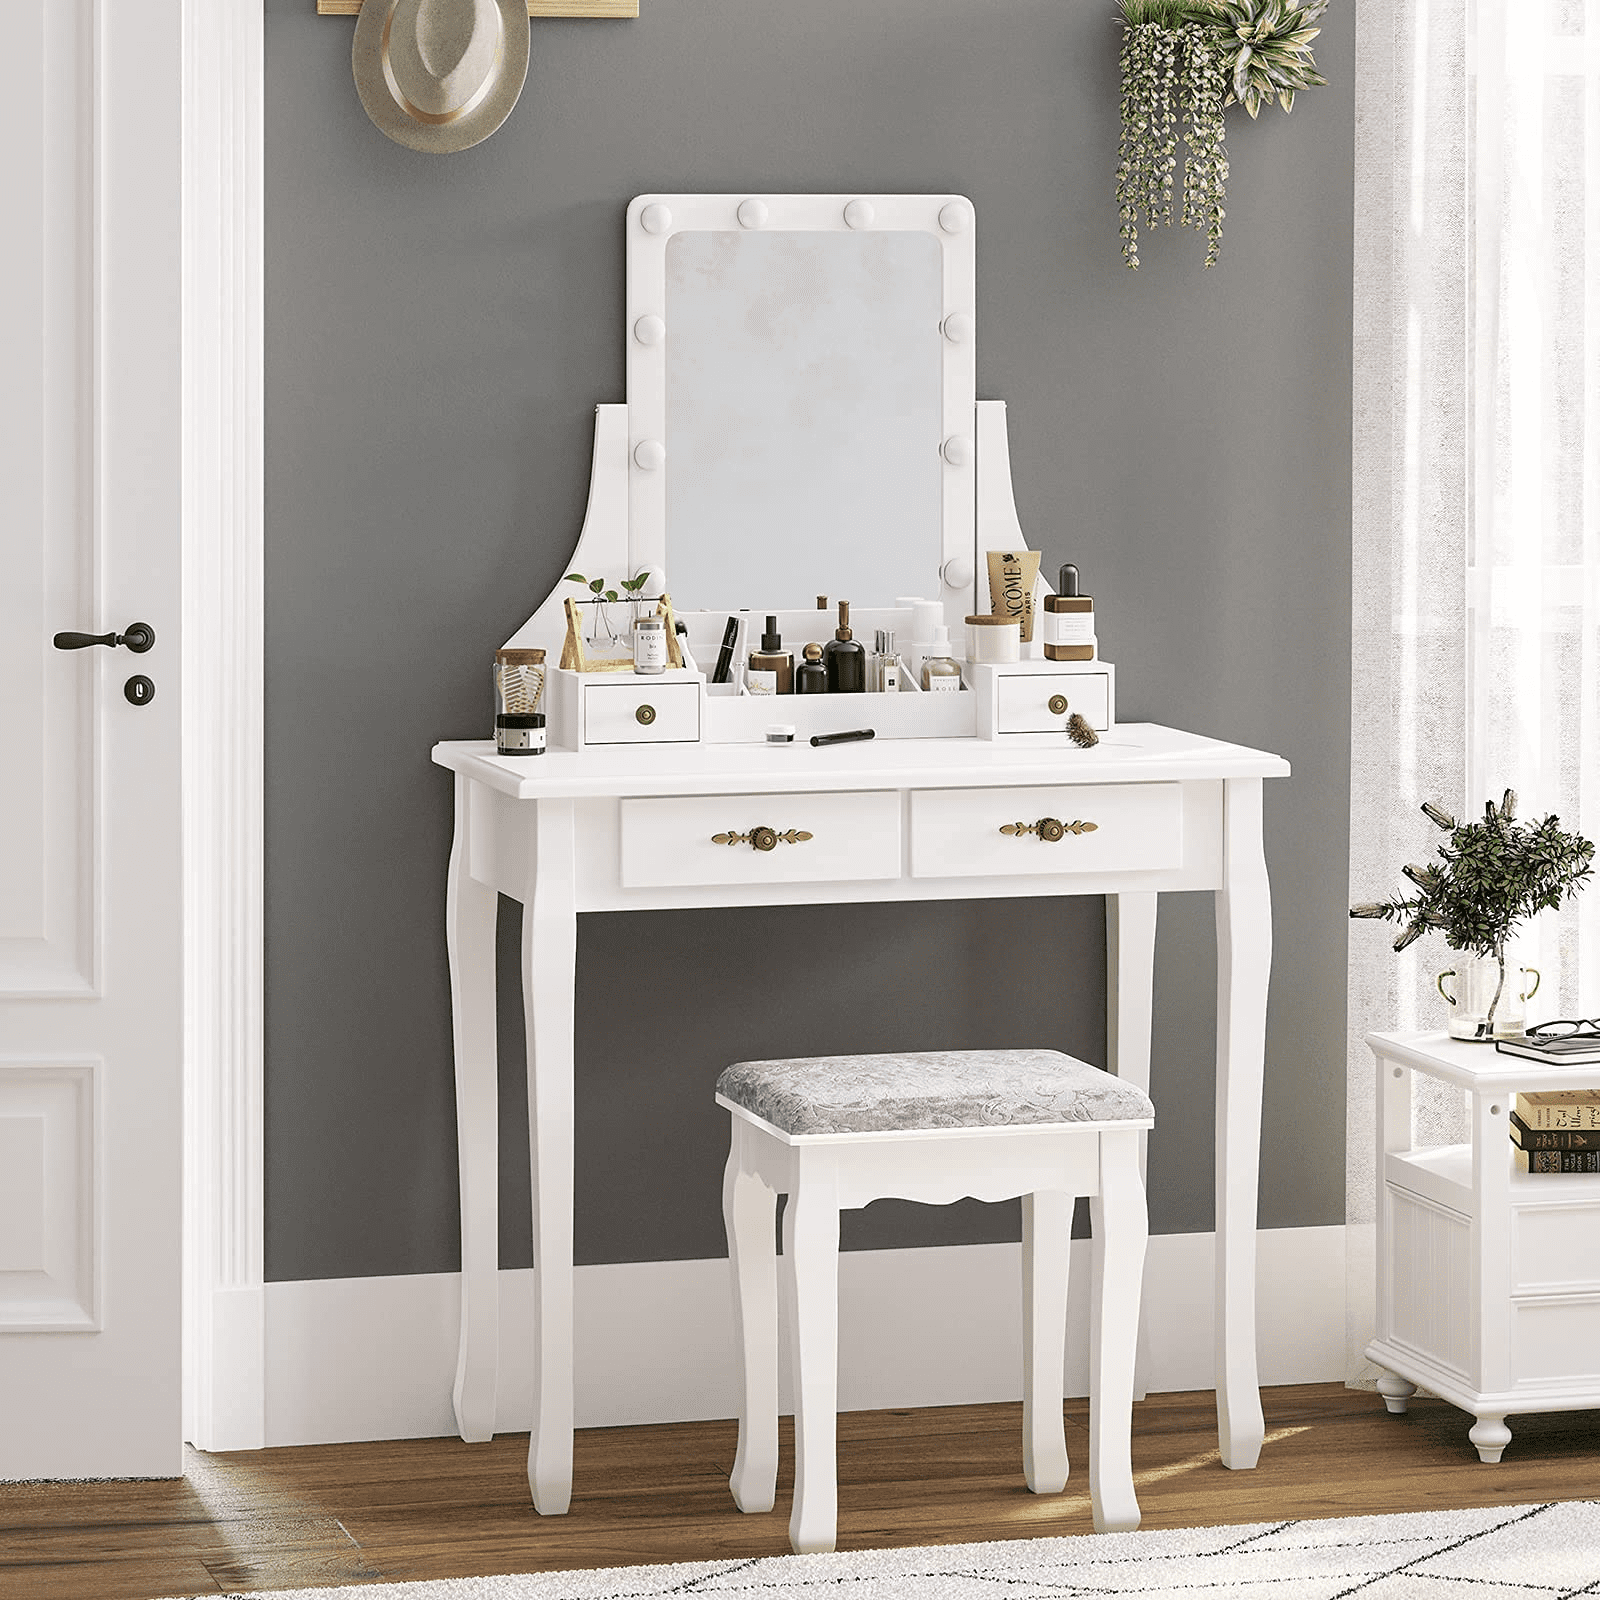 Details about   Amelia Vanity Set Dressing Table With Mirror & Stool Children Kids Wooden White 